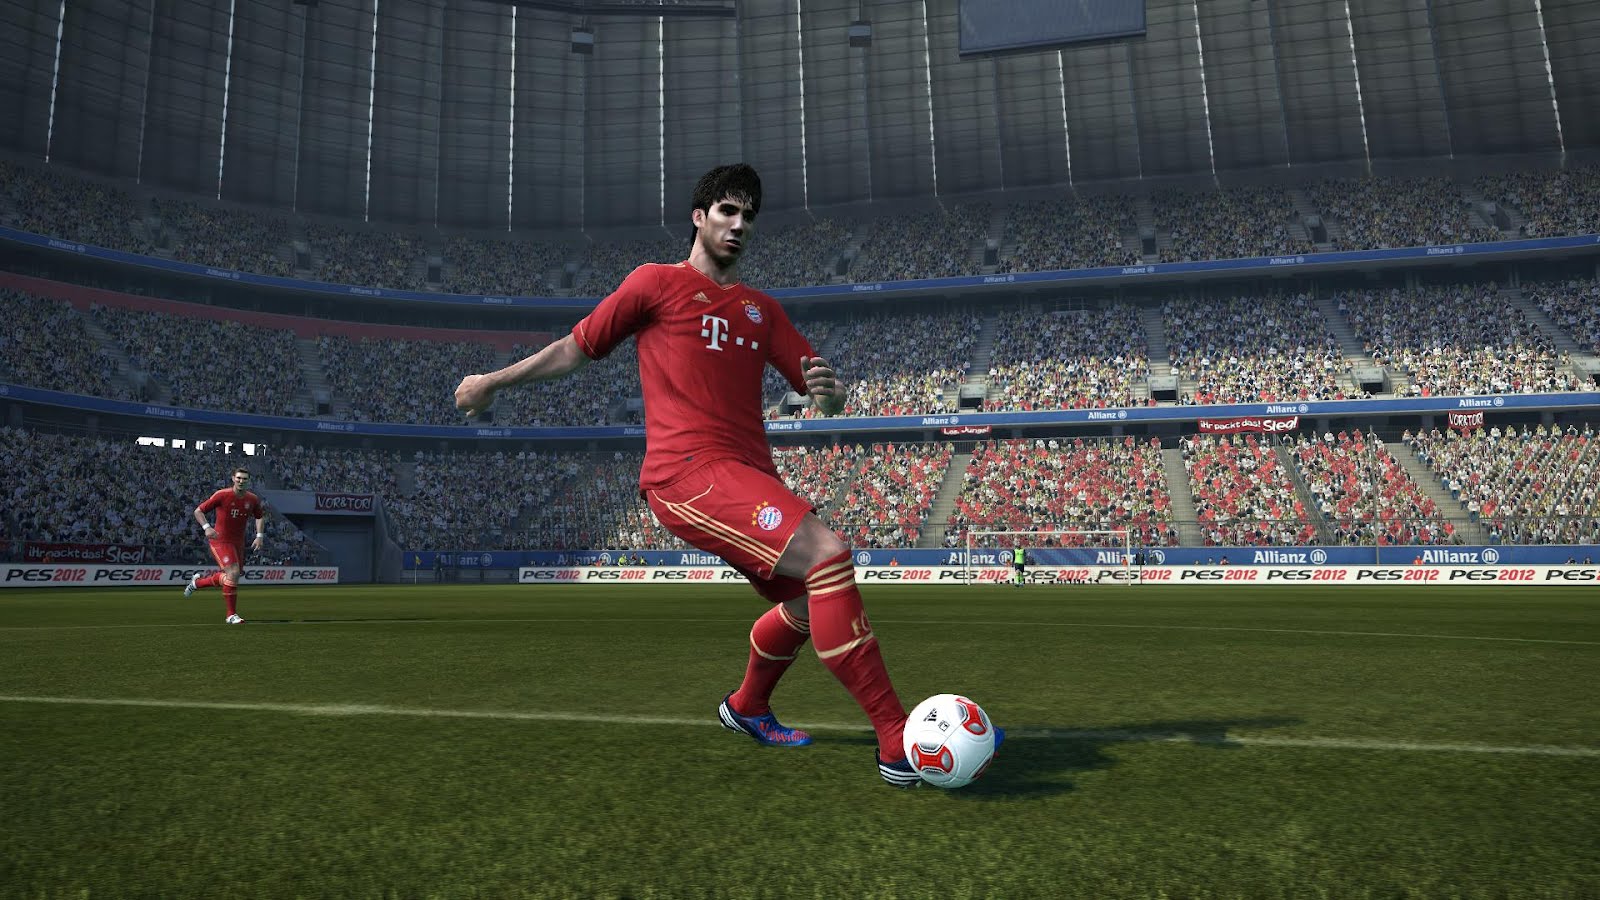 PES 2012 PESEdit.com 2012 Patch 3.4 + EURO 2012 Patch Add-on 1.0 + 1.1 +  1.2 ~